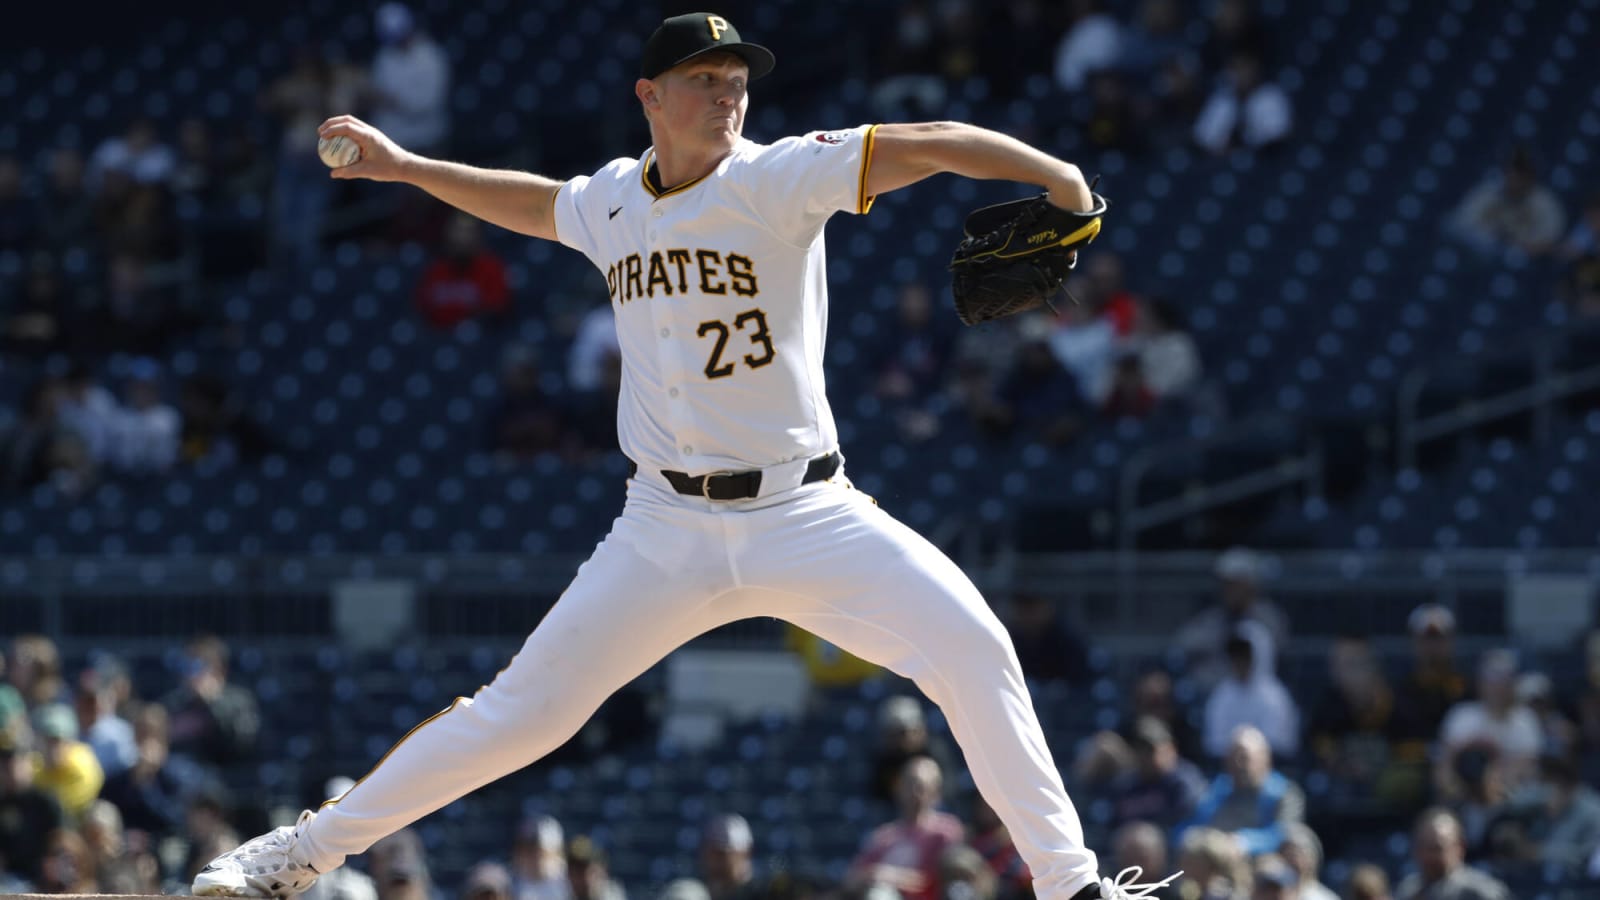 Pirates’ Woes Continue; Losing Streak Hits 5 Games With Loss to Red Sox